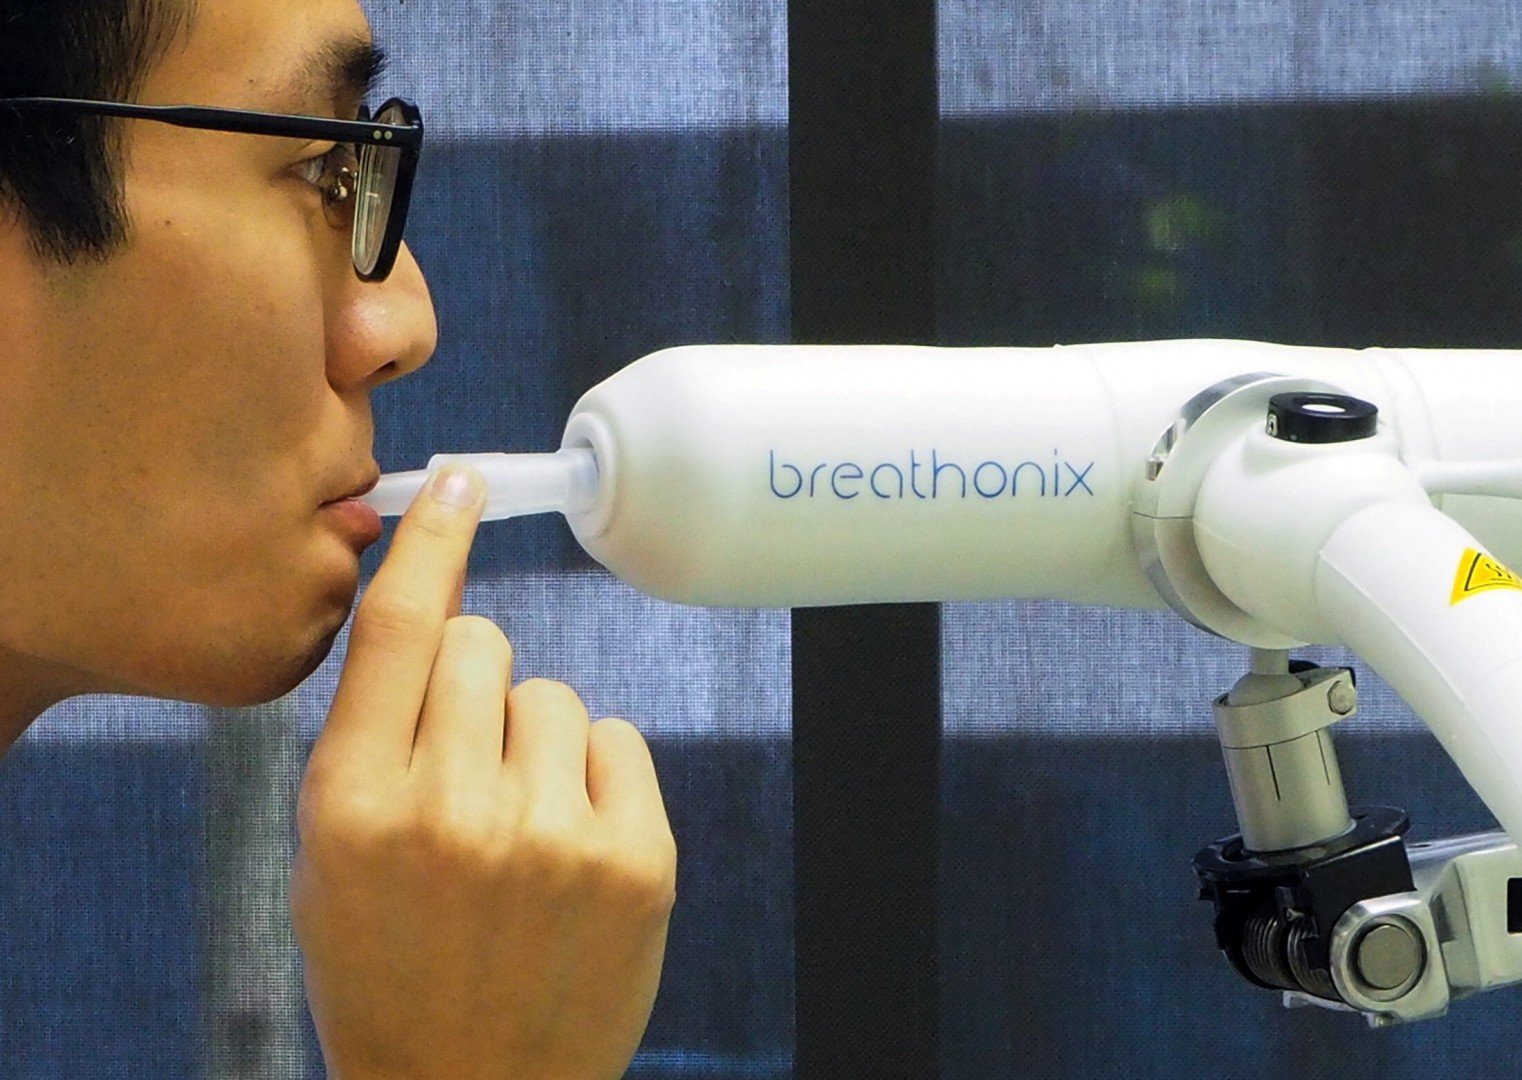 Singapore provisionally approves 60-second COVID-19 breathalyser test